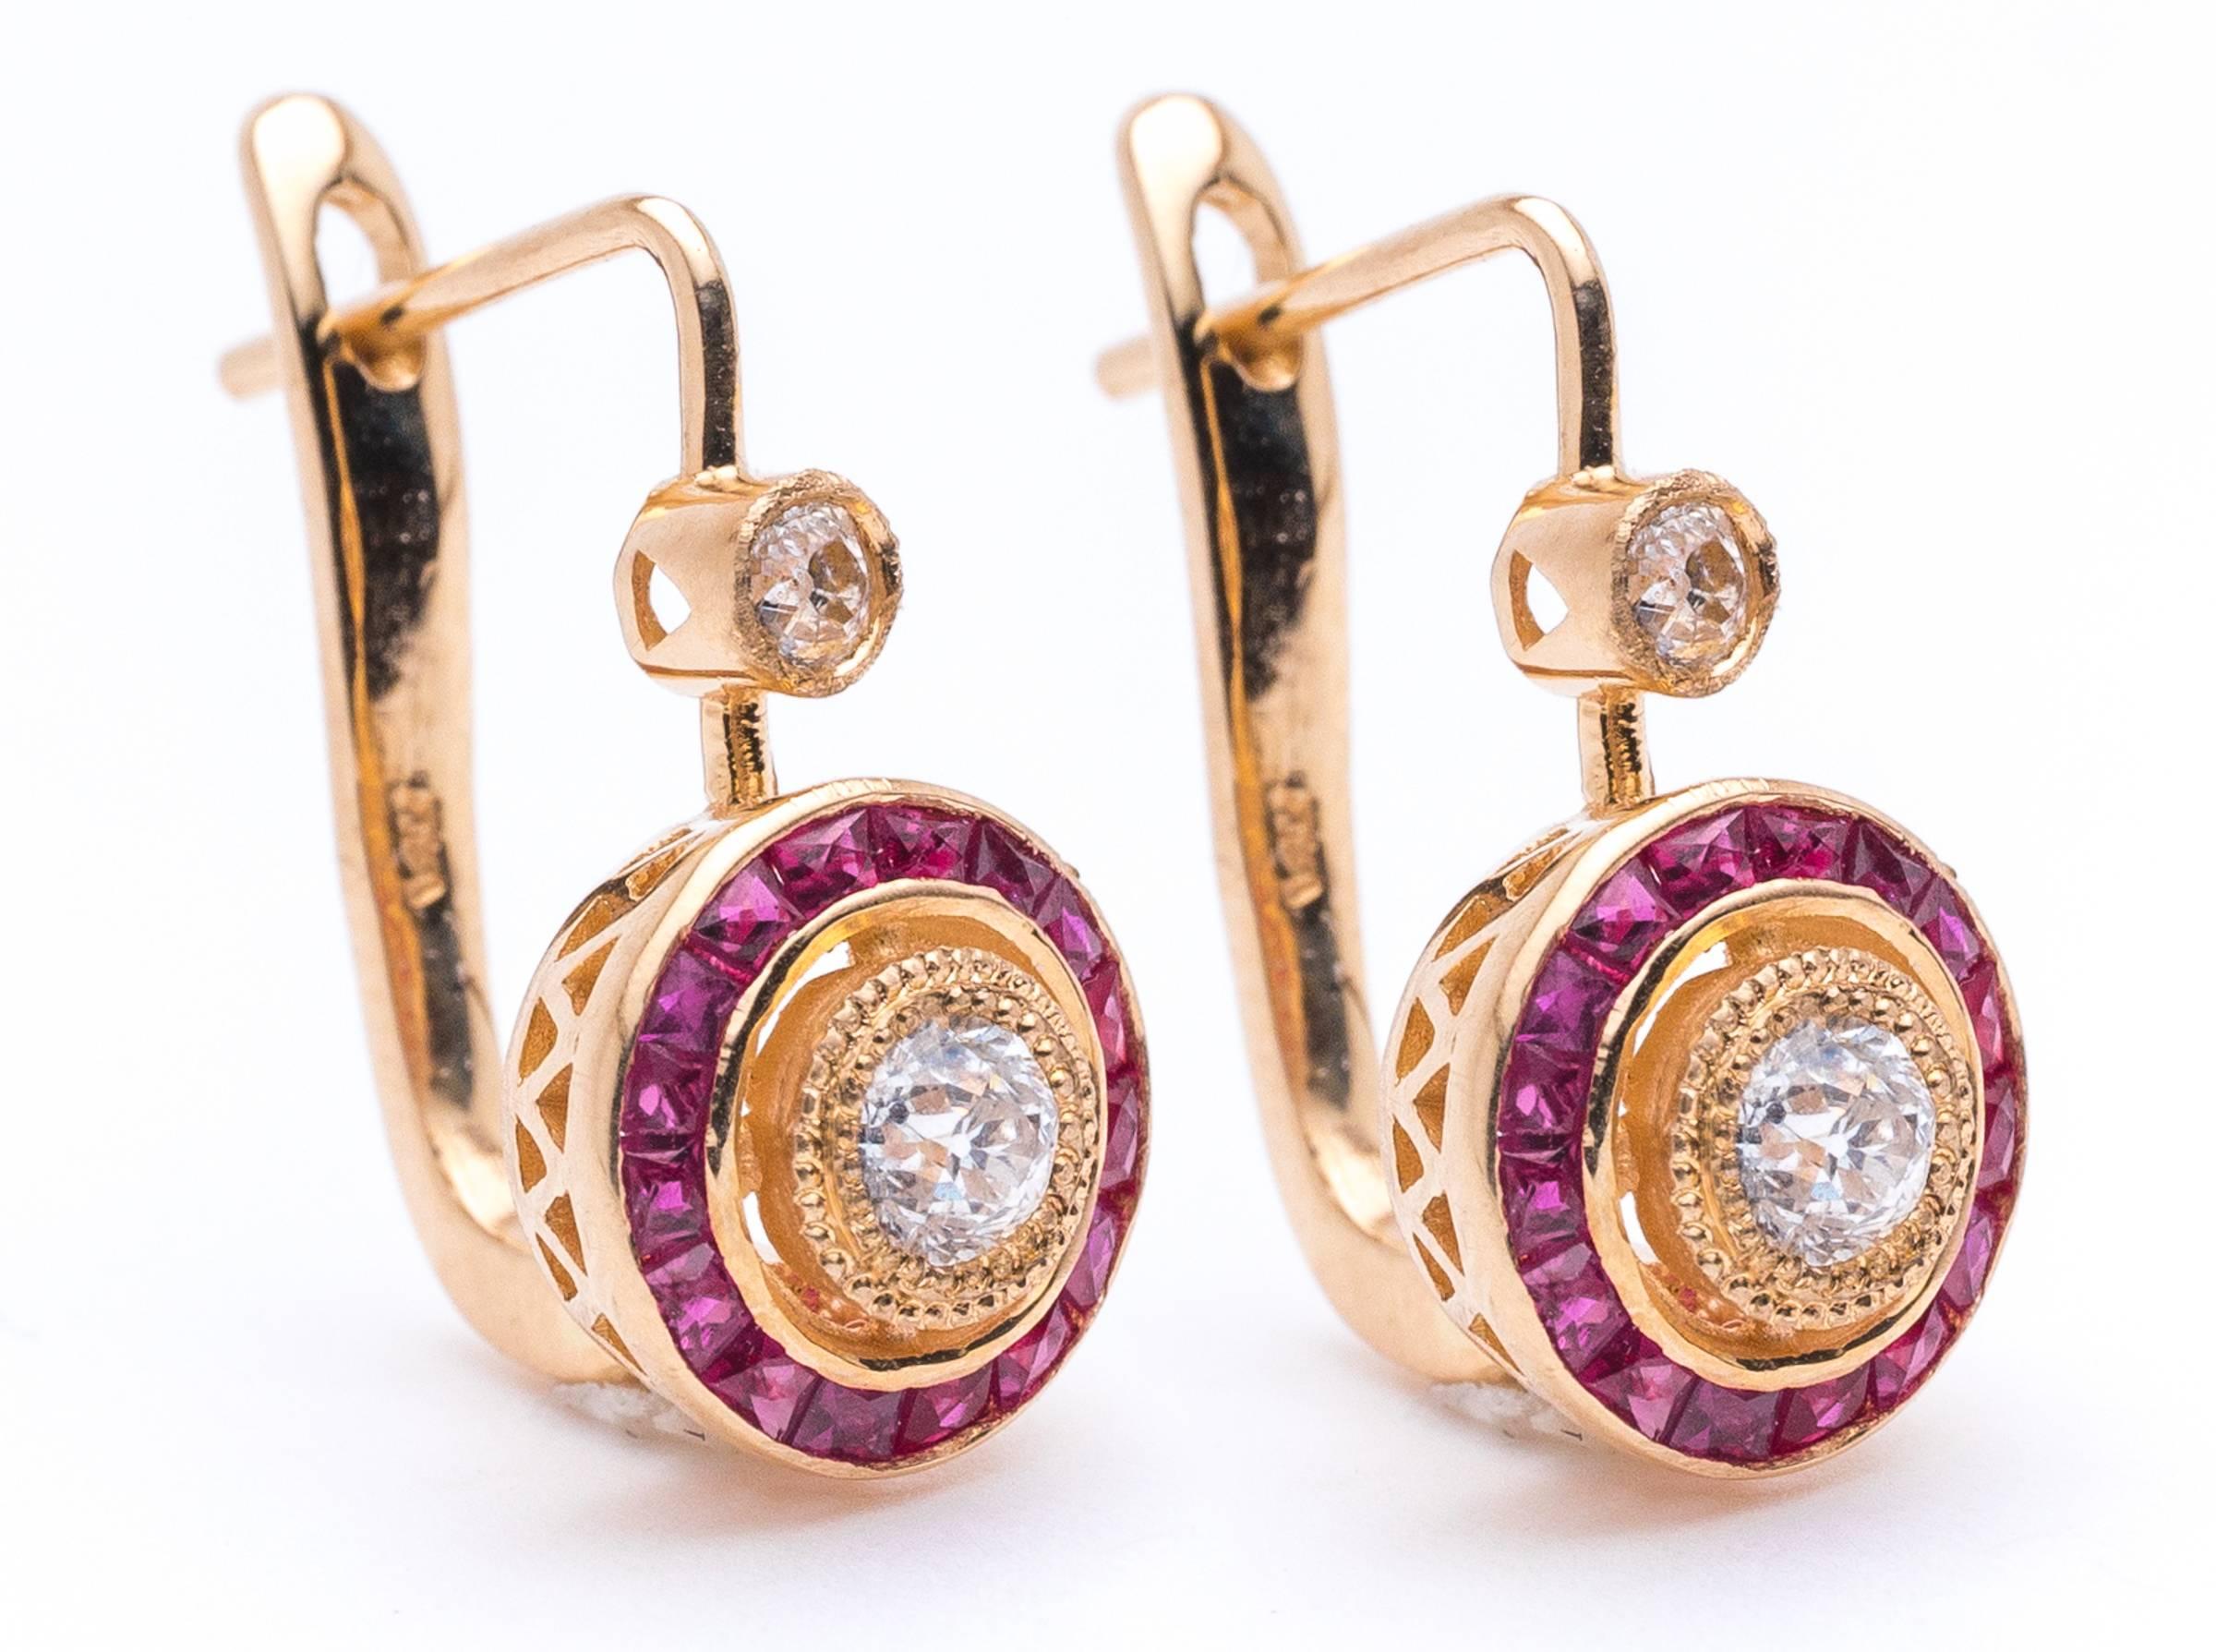 Striking French Cut Ruby and Diamond Gold Earrings In Excellent Condition For Sale In Boston, MA